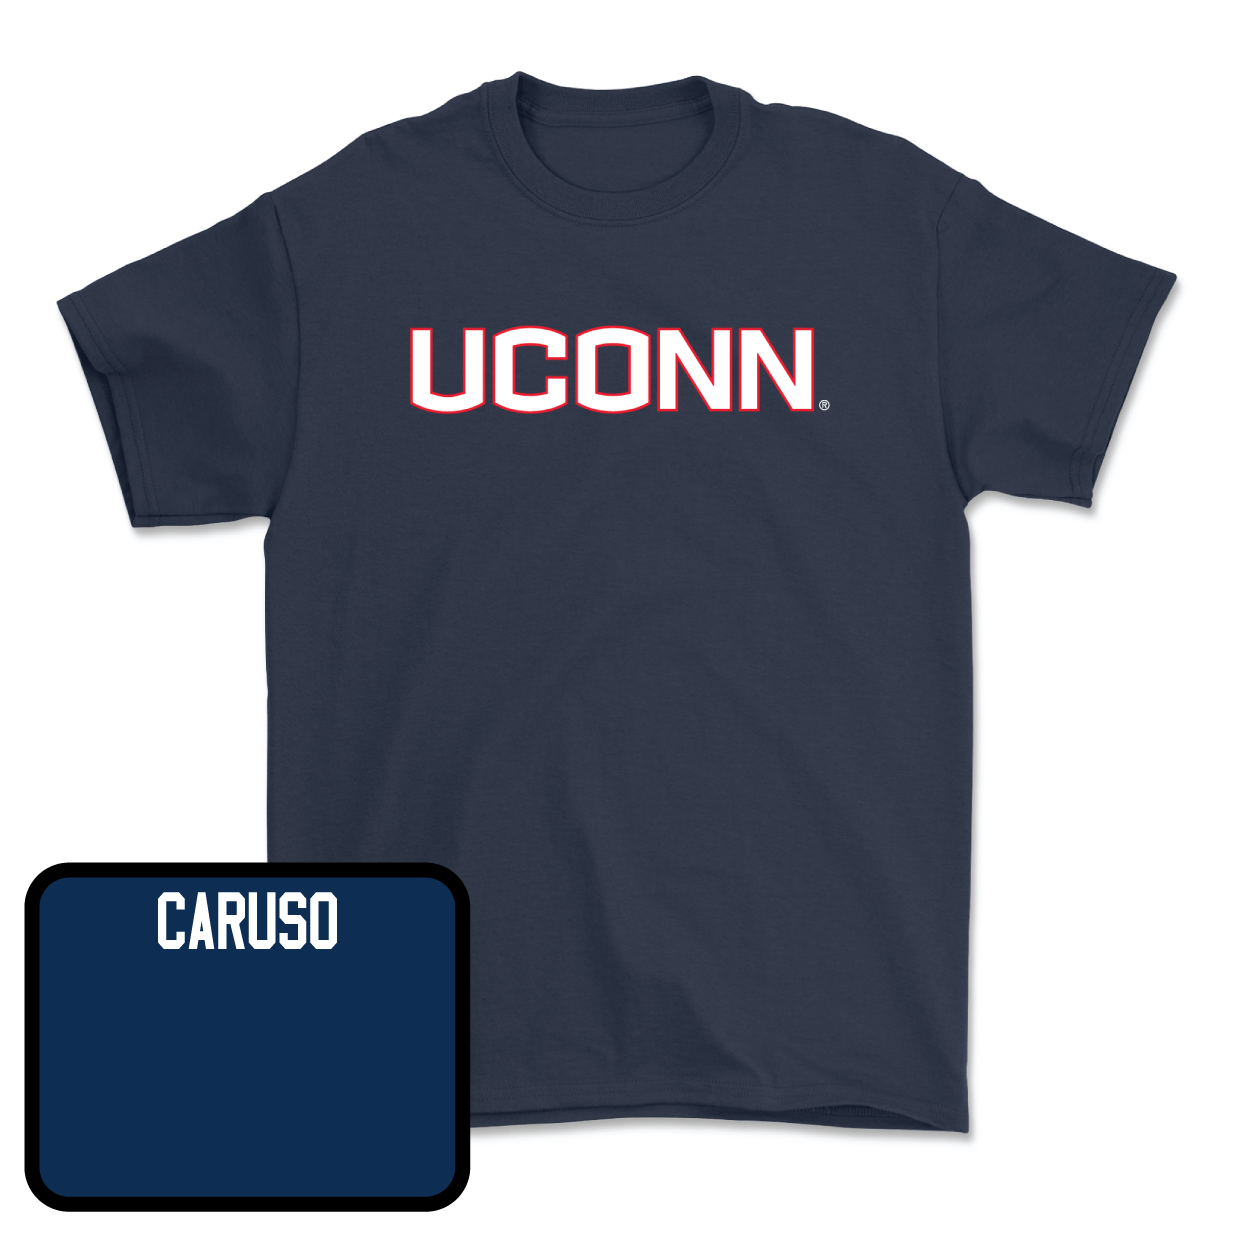 Navy Women's Rowing UConn Tee Youth Small / Riley Caruso